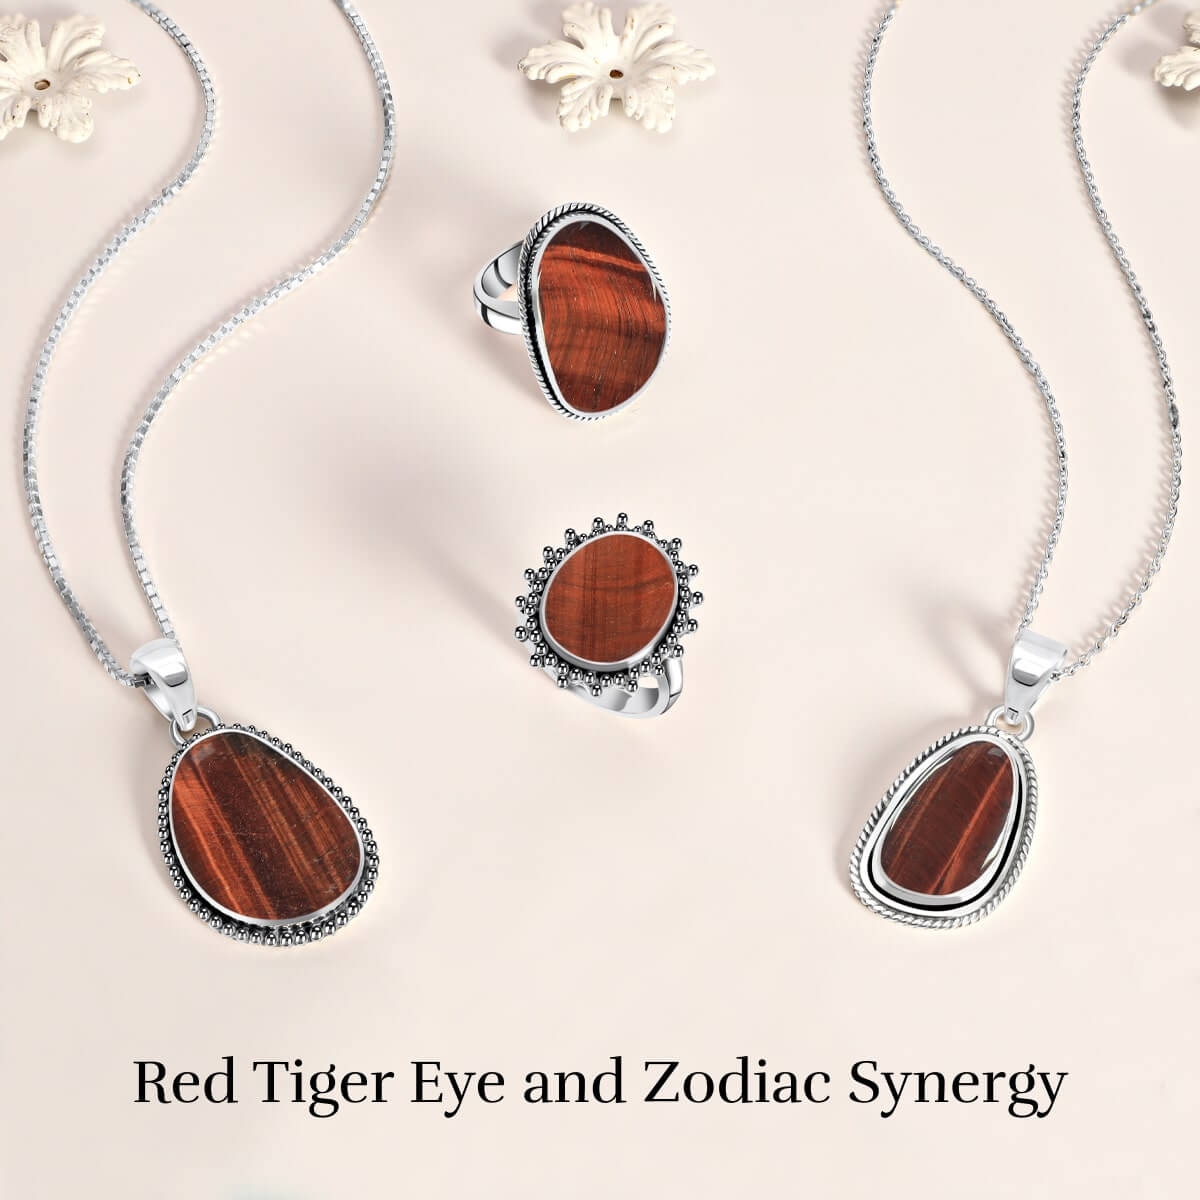 Red Tiger Eye is Associated With Which Zodiac Sign